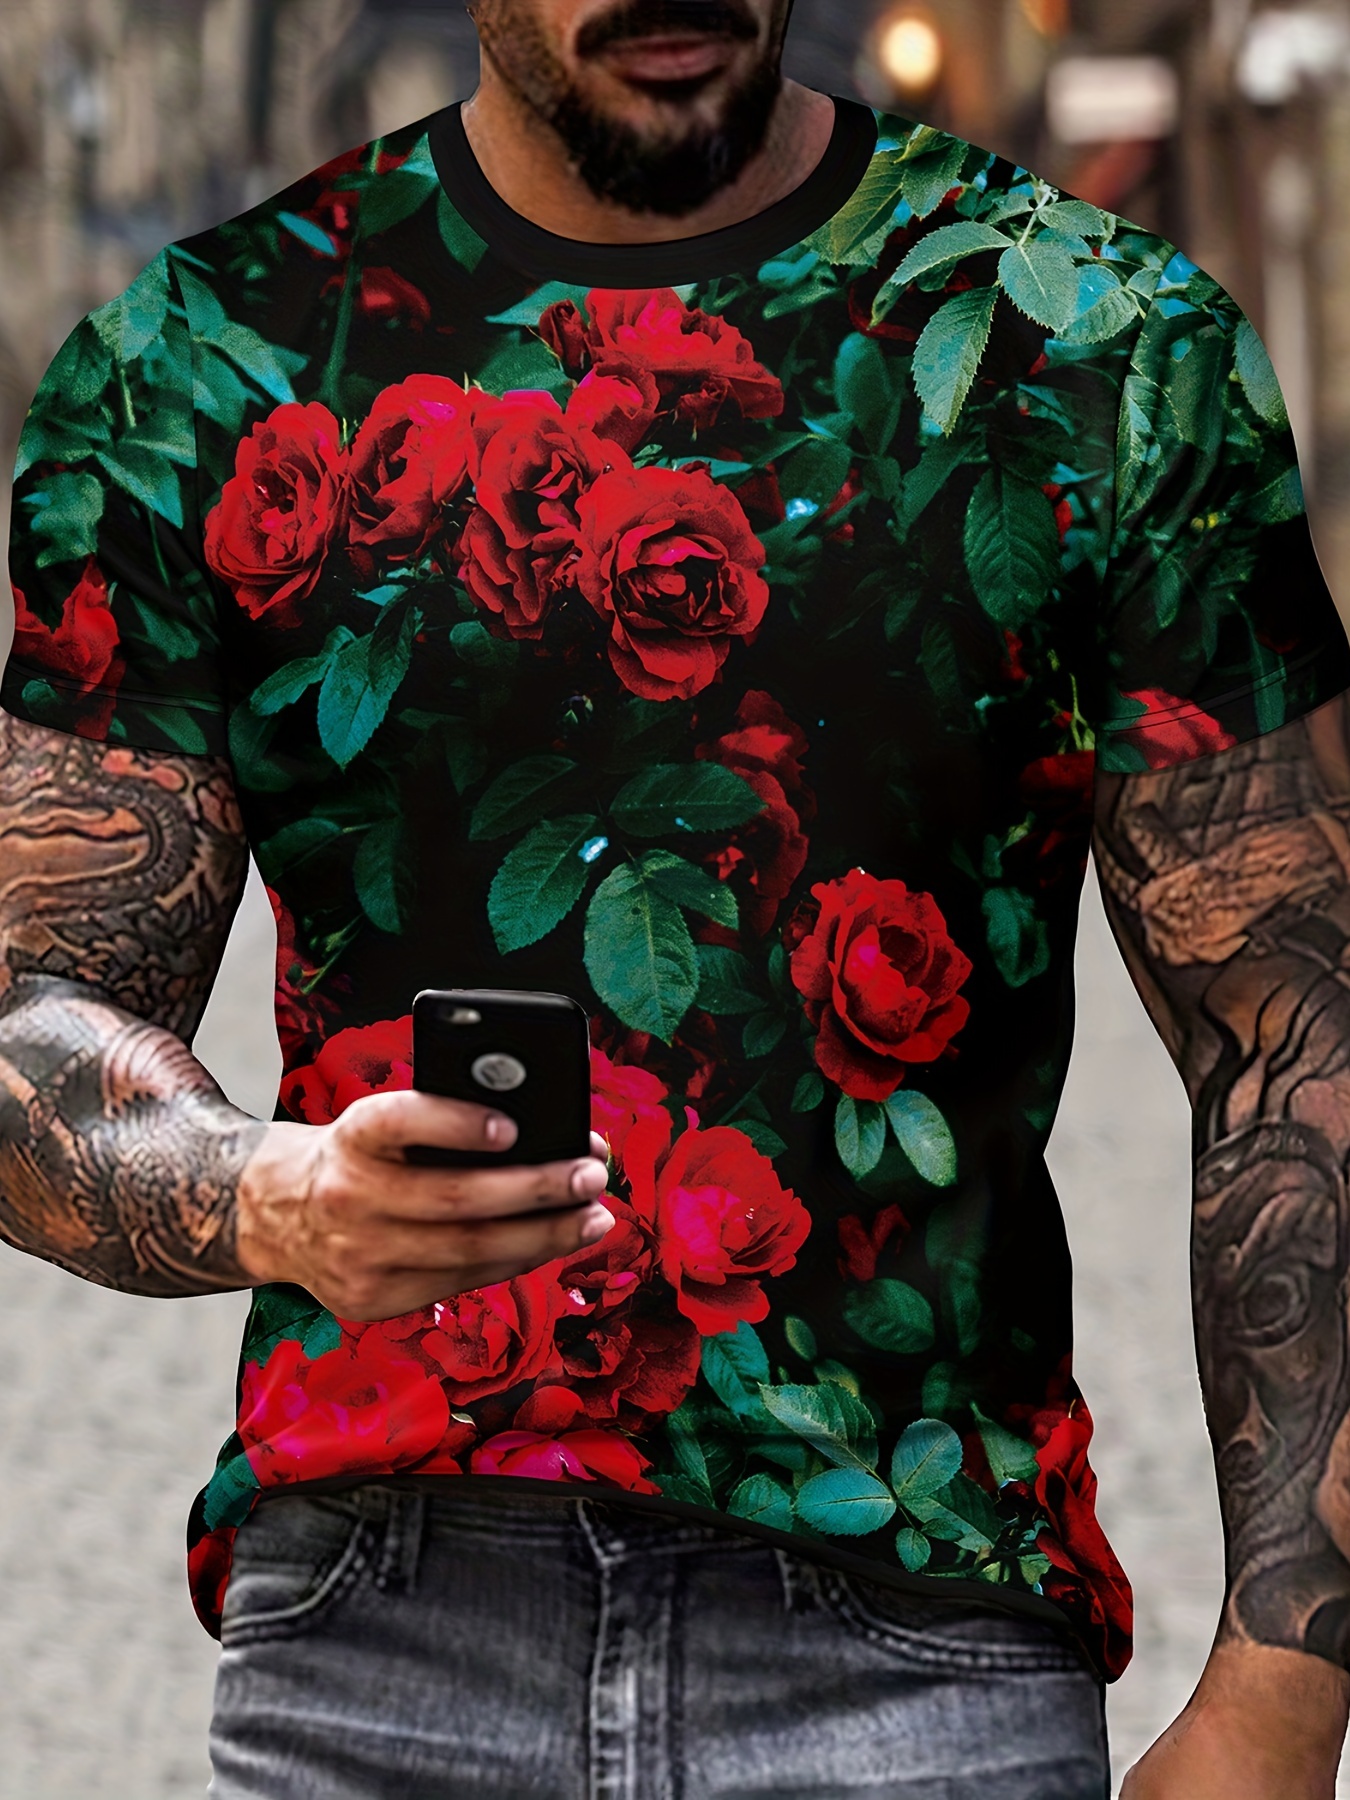 Plus Size Men's Rose Pattern Graphic Tees, Summer Comfy T-shirts